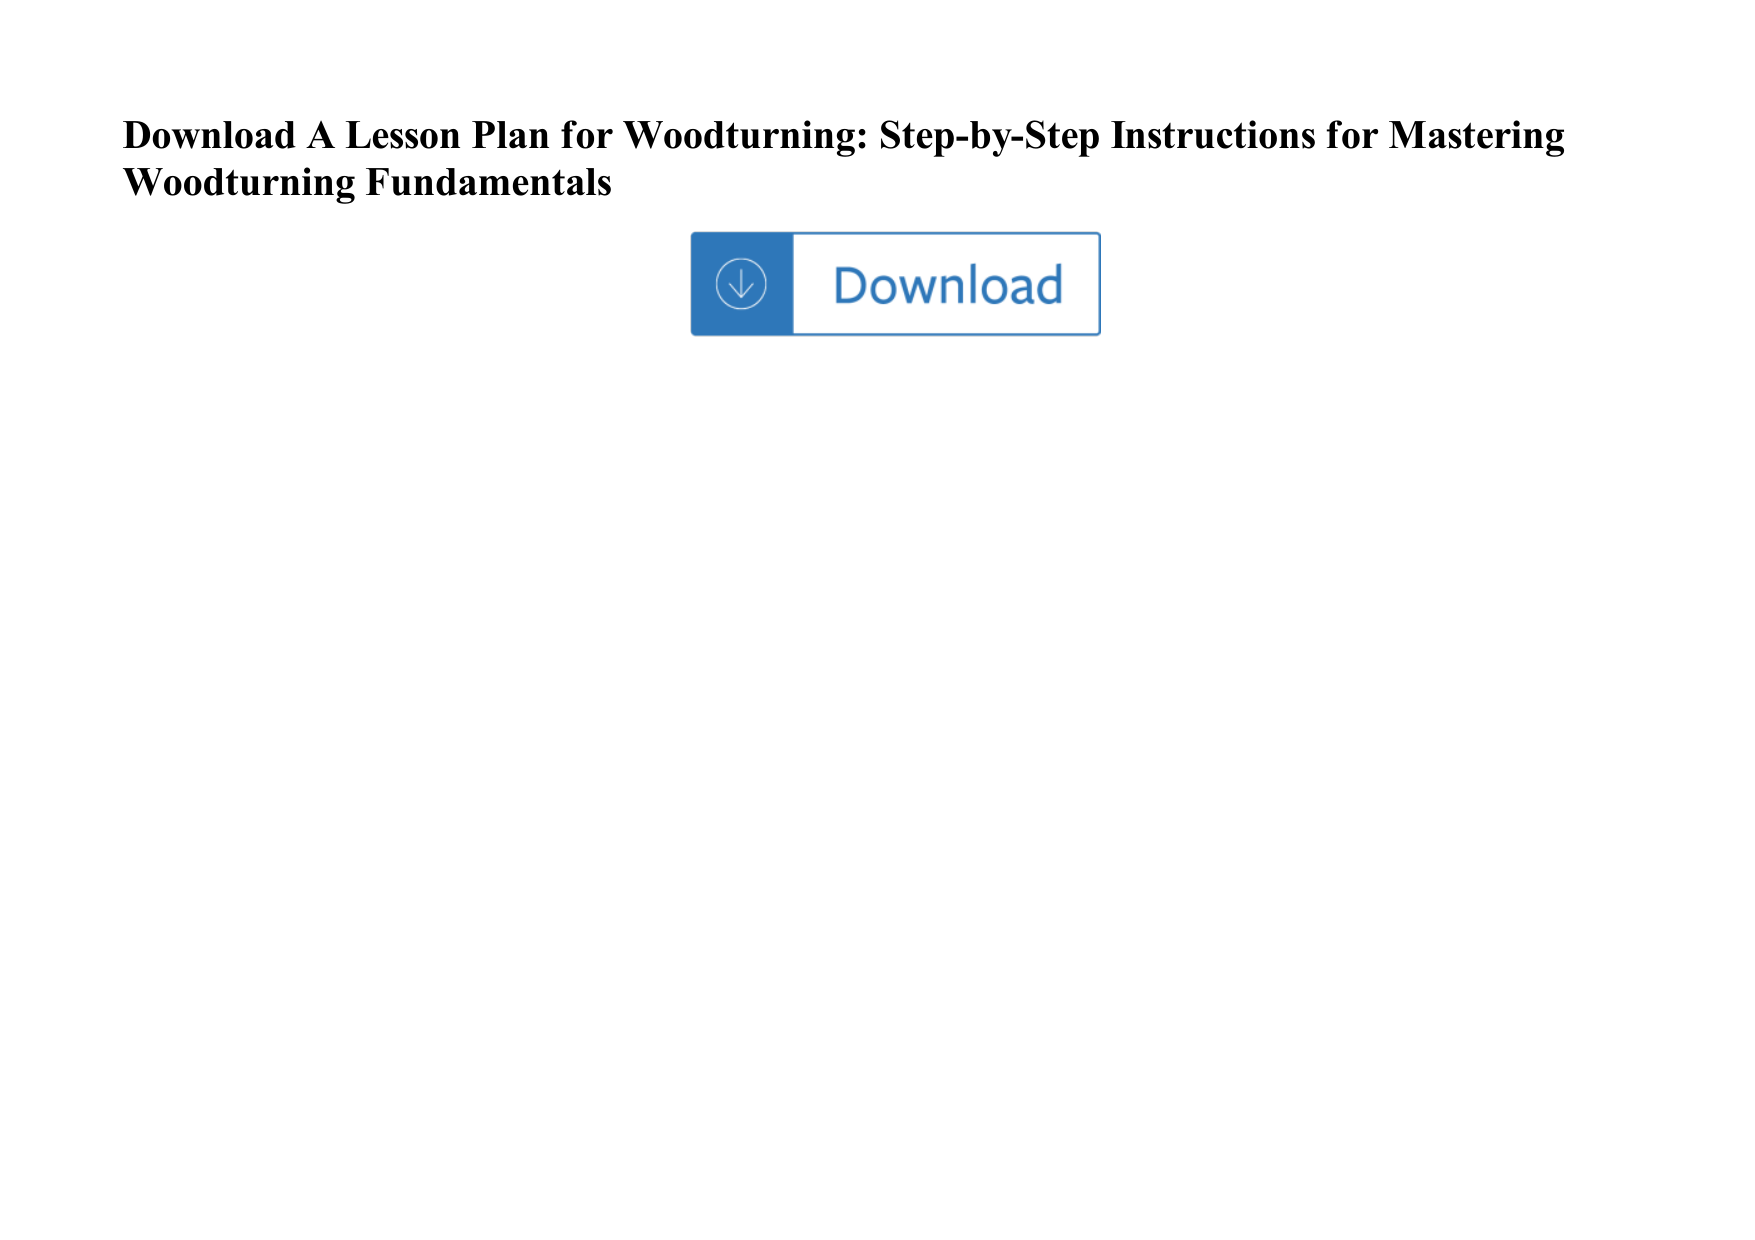 Page 1 of 1 - A Lesson Plan For Woodturning: Step-by-Step Instructions Mastering Woodturning Fundamentals A-lesson-plan-for-woodturning-step-by-step-instructions-for-mastering-woodturning-fundamentals